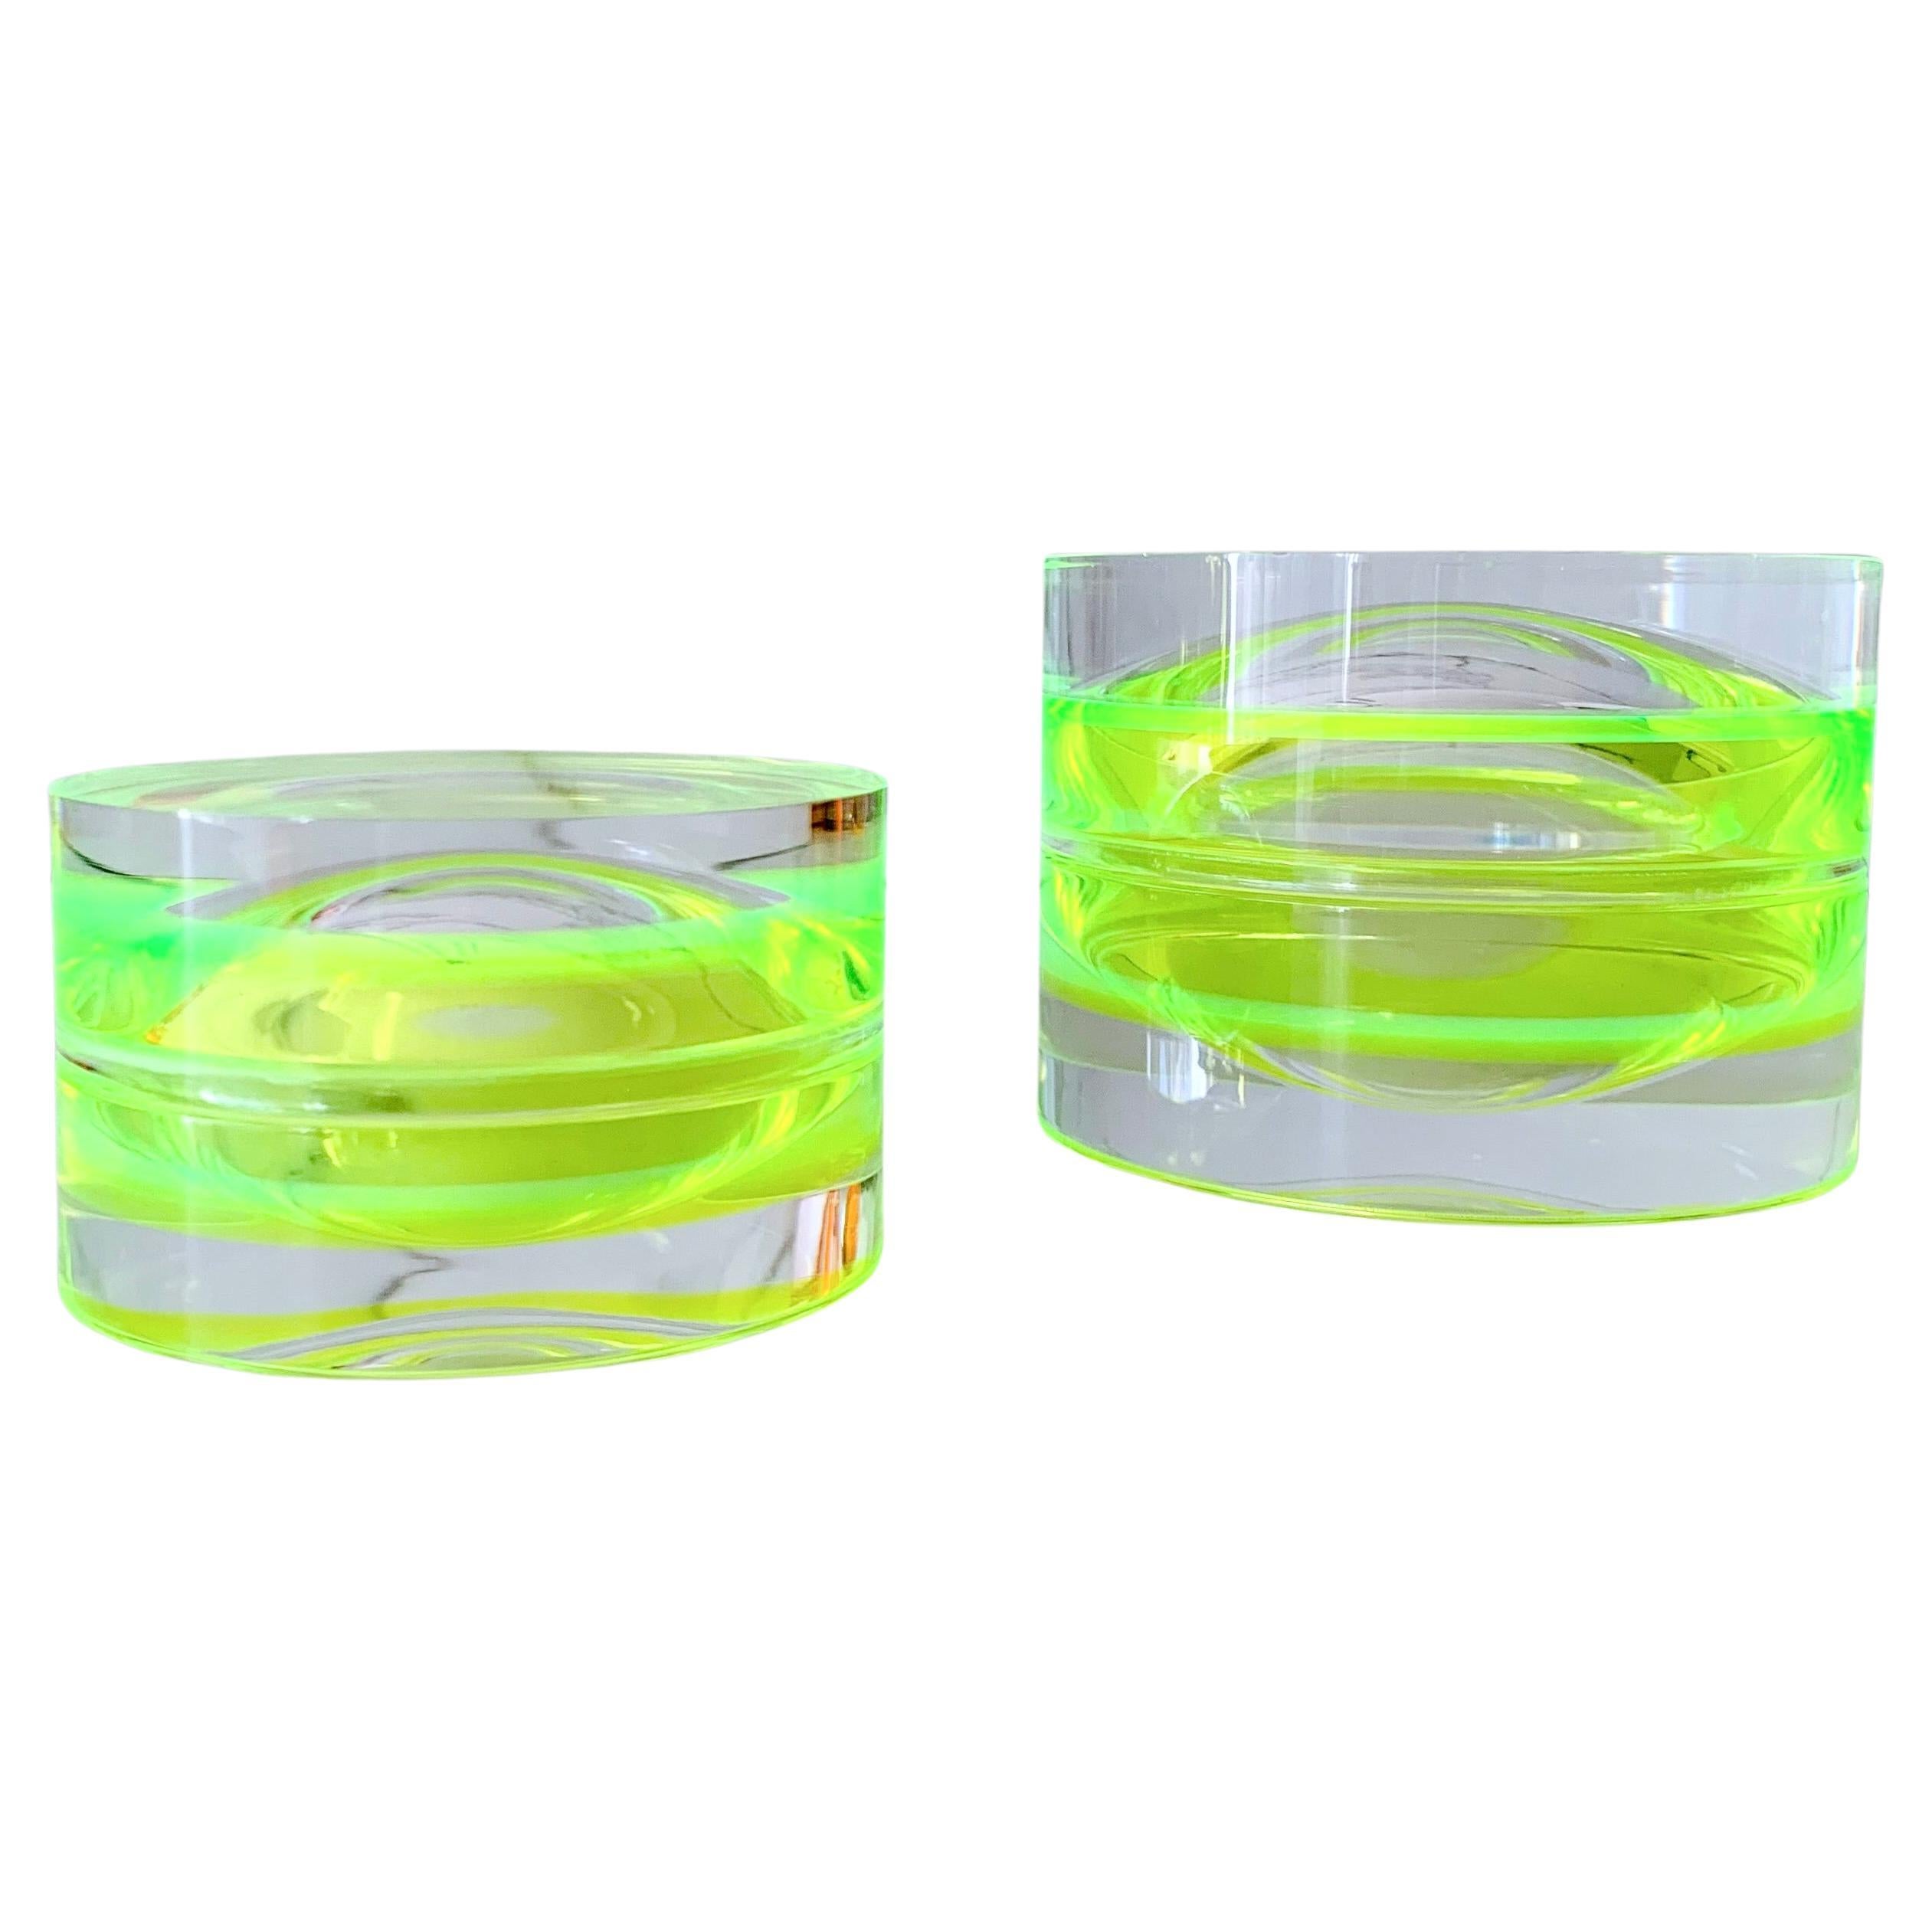 Neon Green Acrylic Small Round Box by Paola Valle